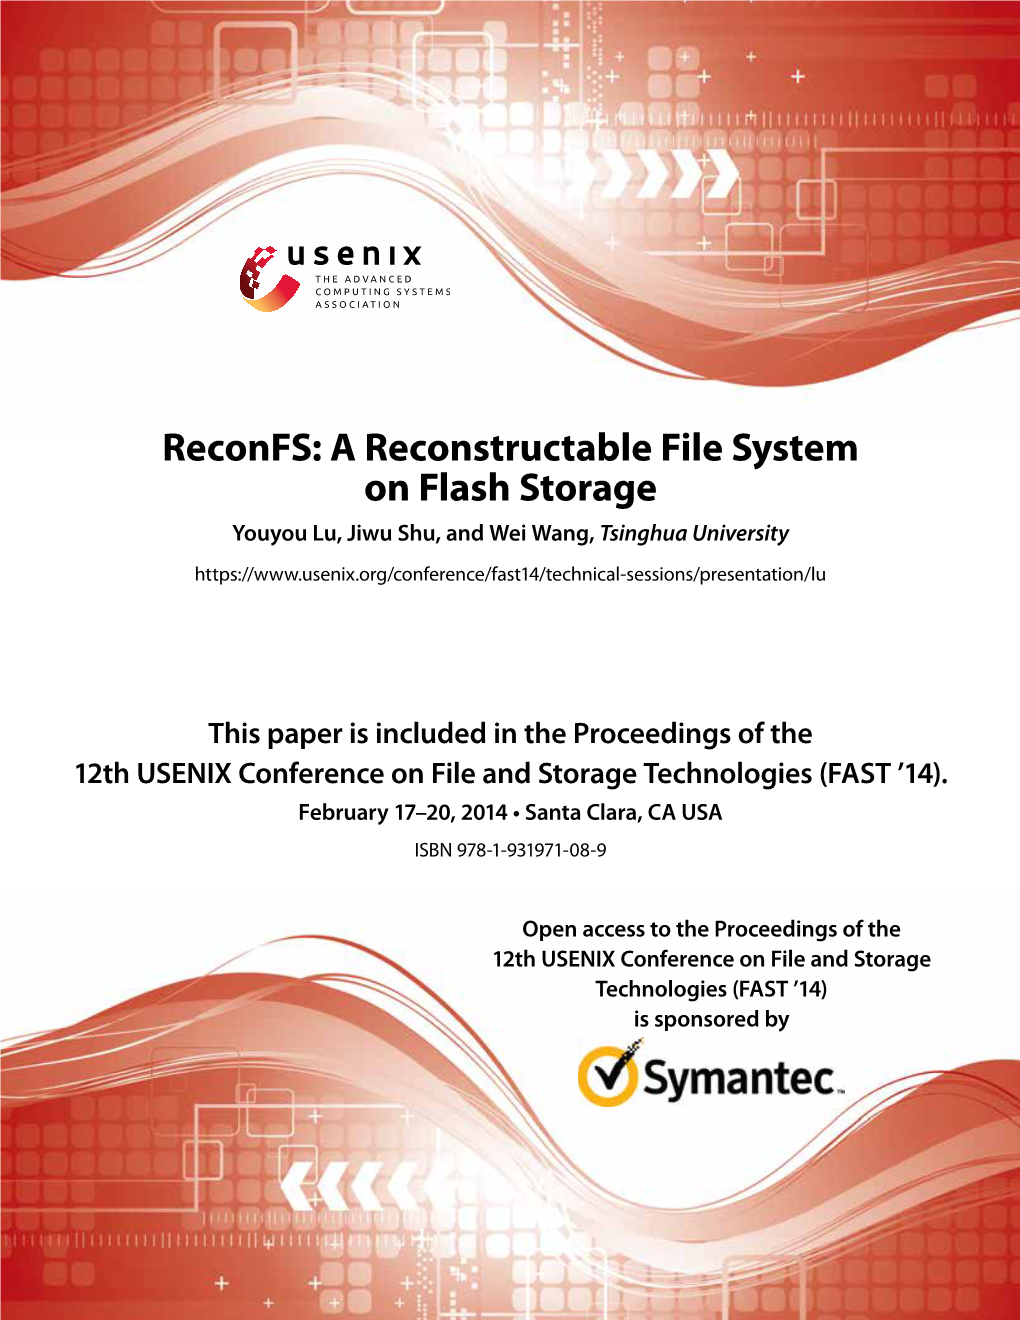 A Reconstructable File System on Flash Storage